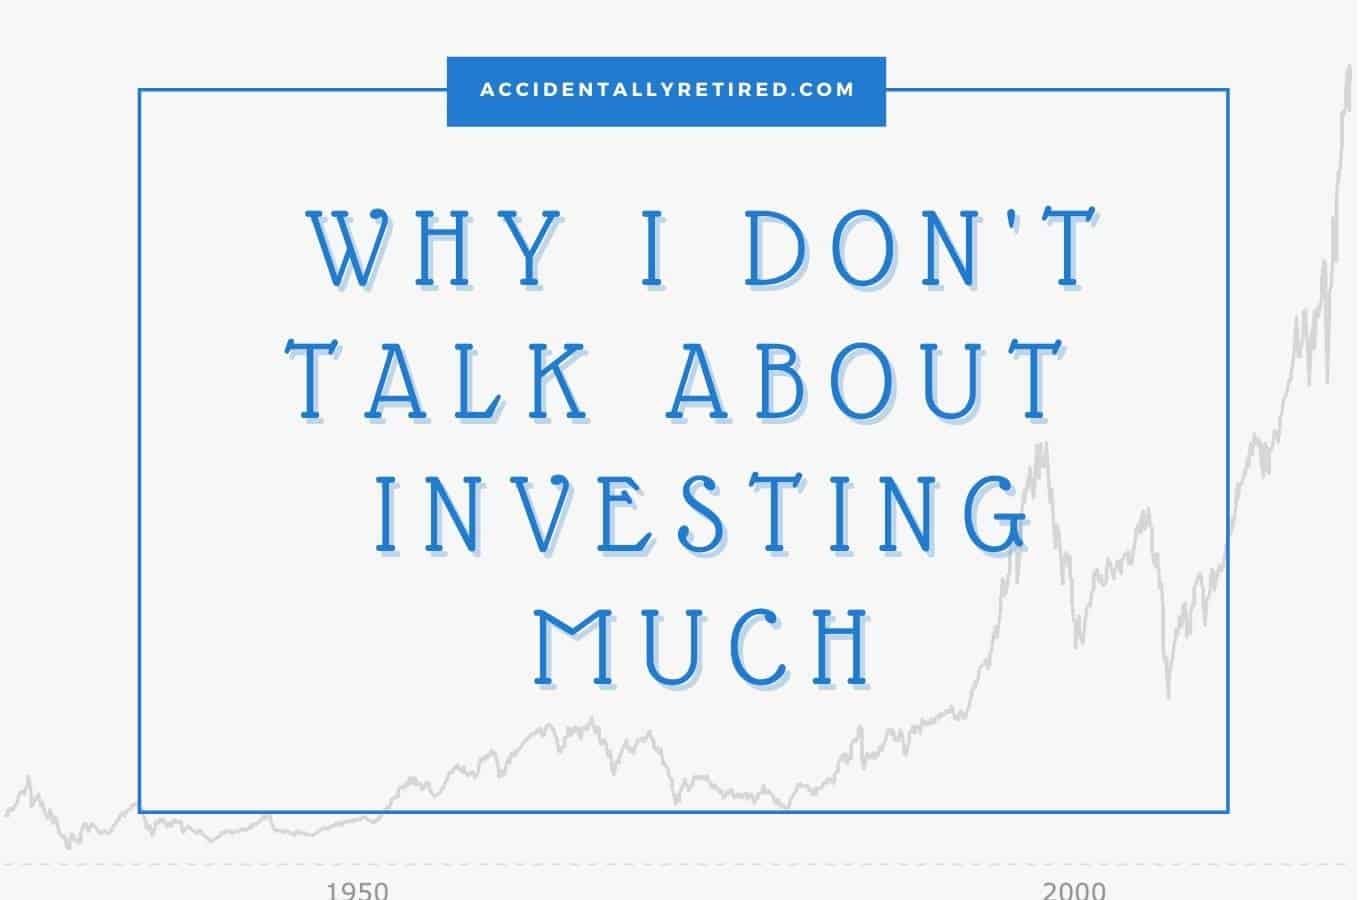 Why I don't talk about investing much